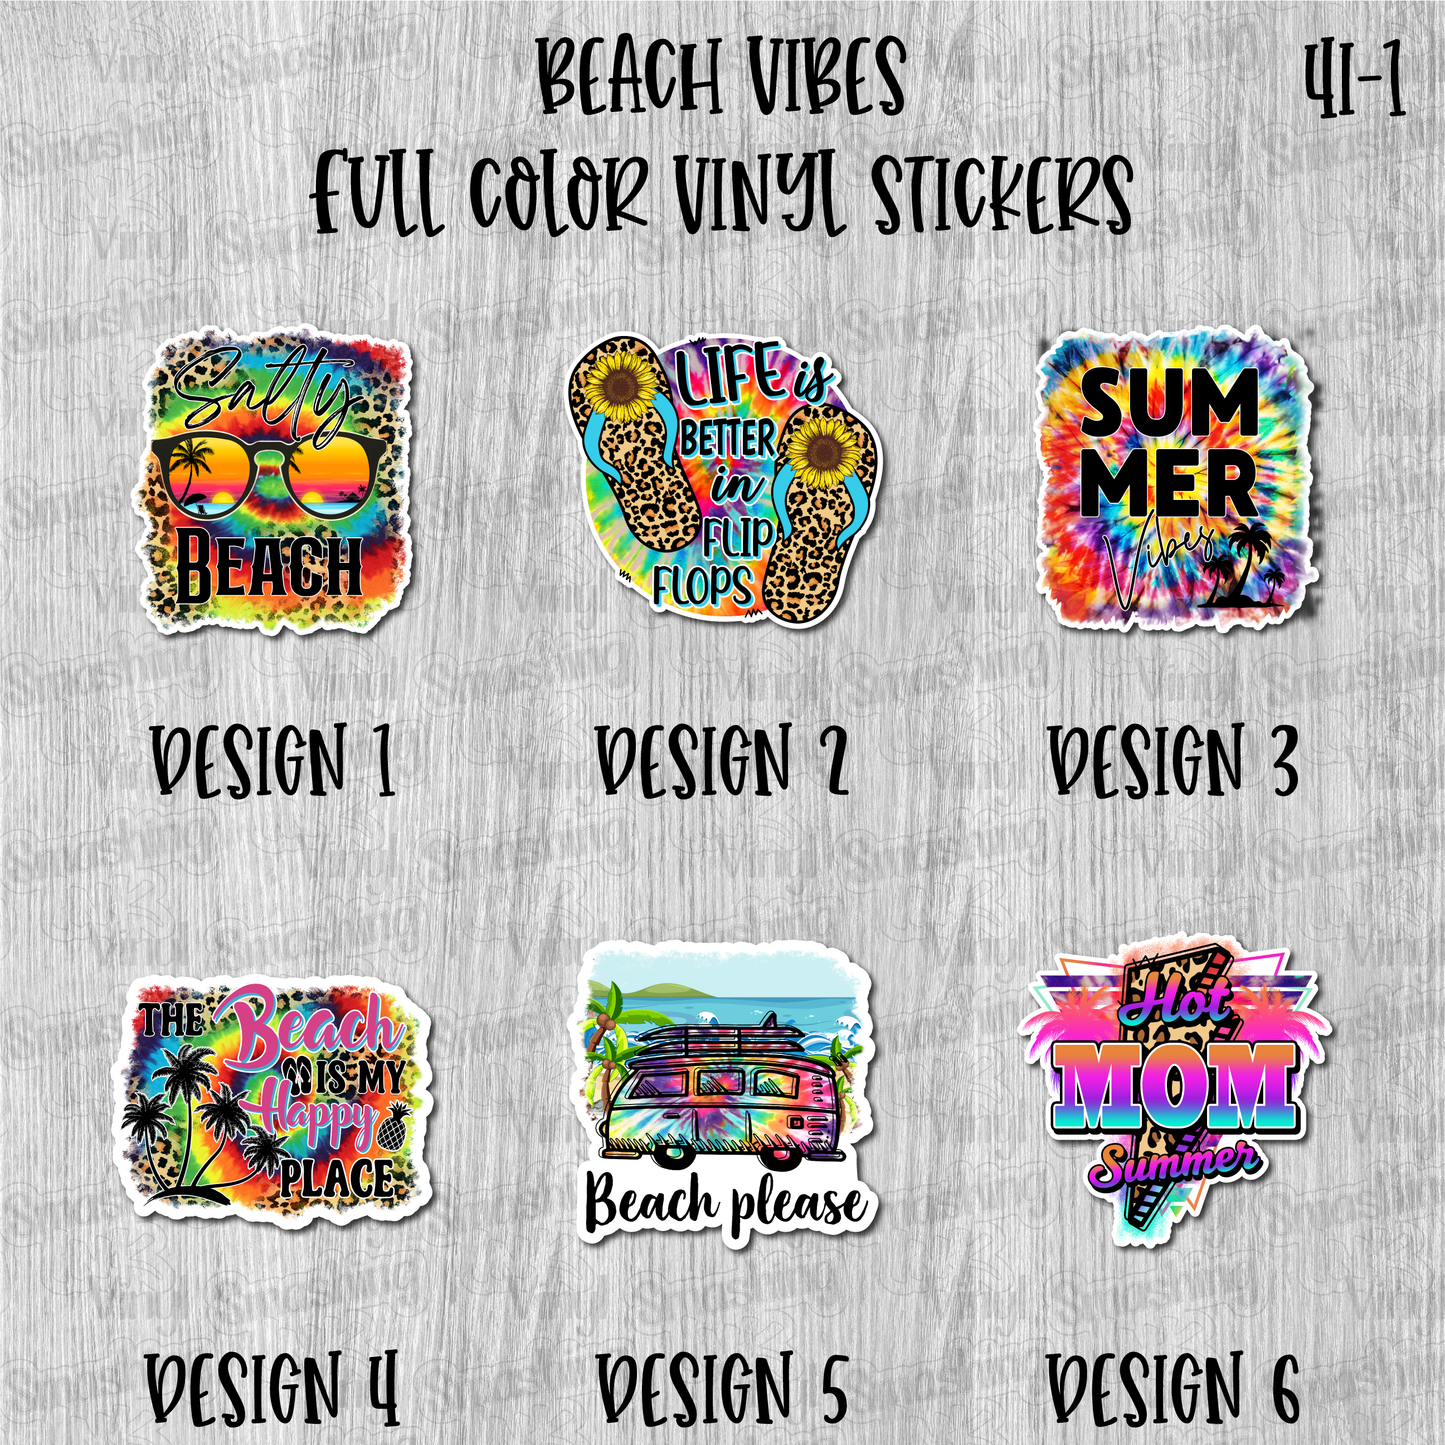 Beach Vibes - Full Color Vinyl Stickers (SHIPS IN 3-7 BUS DAYS)